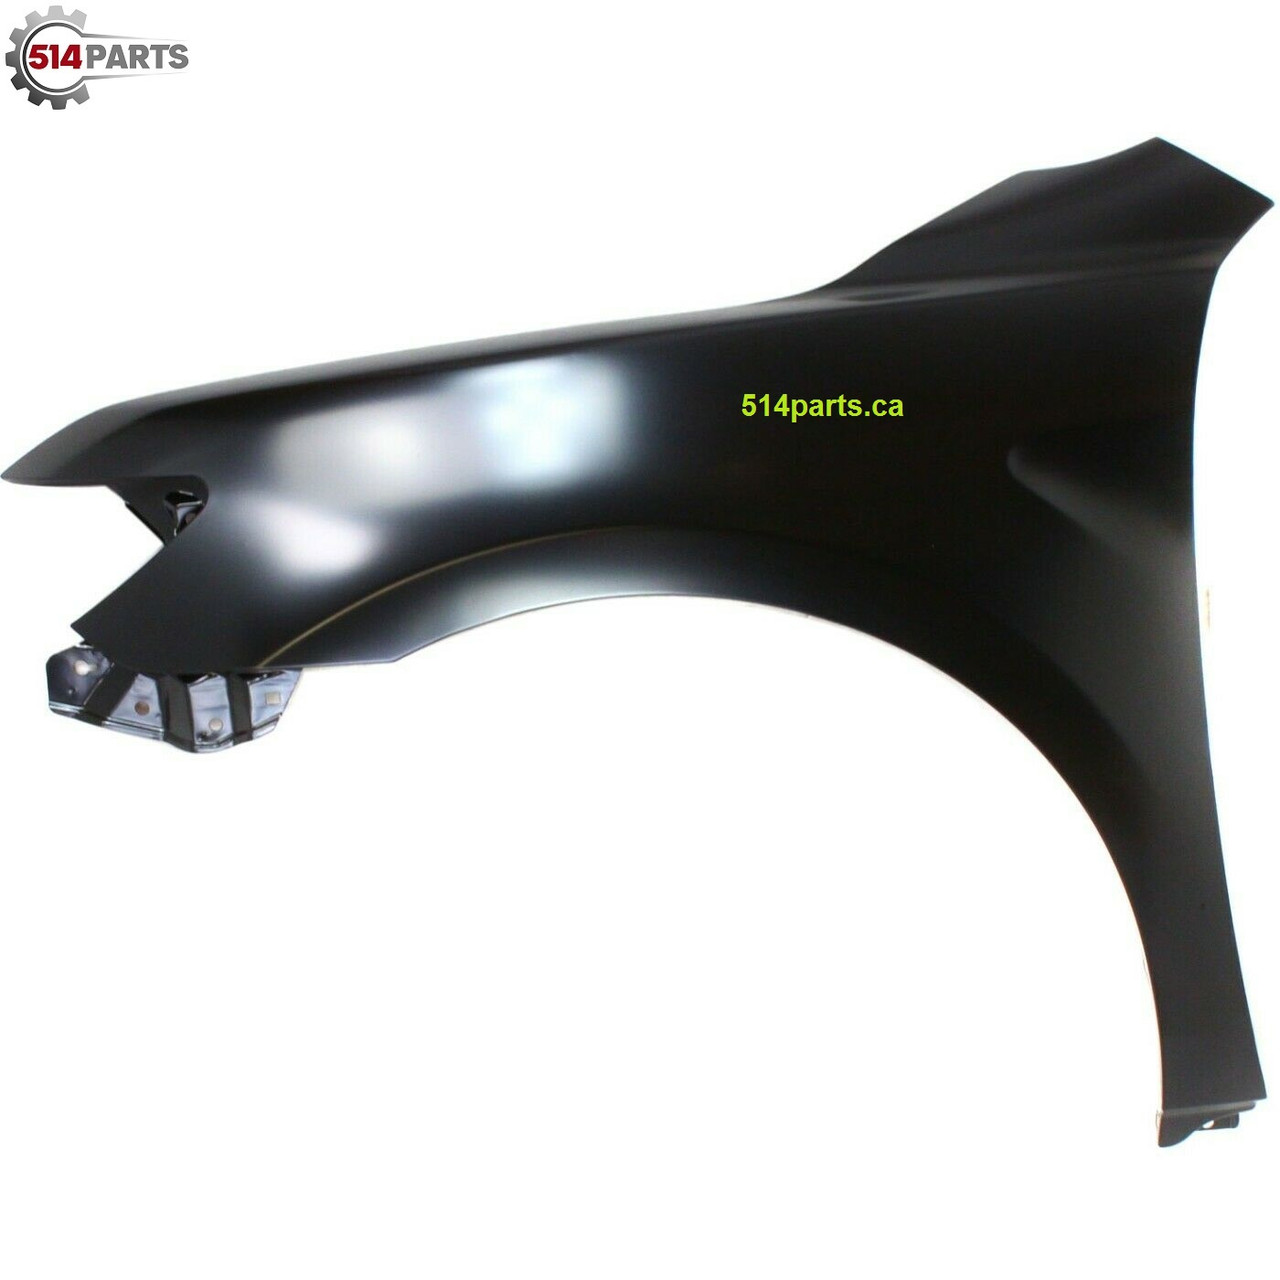 2007 - 2011 TOYOTA CAMRY and CAMRY HYBRID FENDERS - AILES